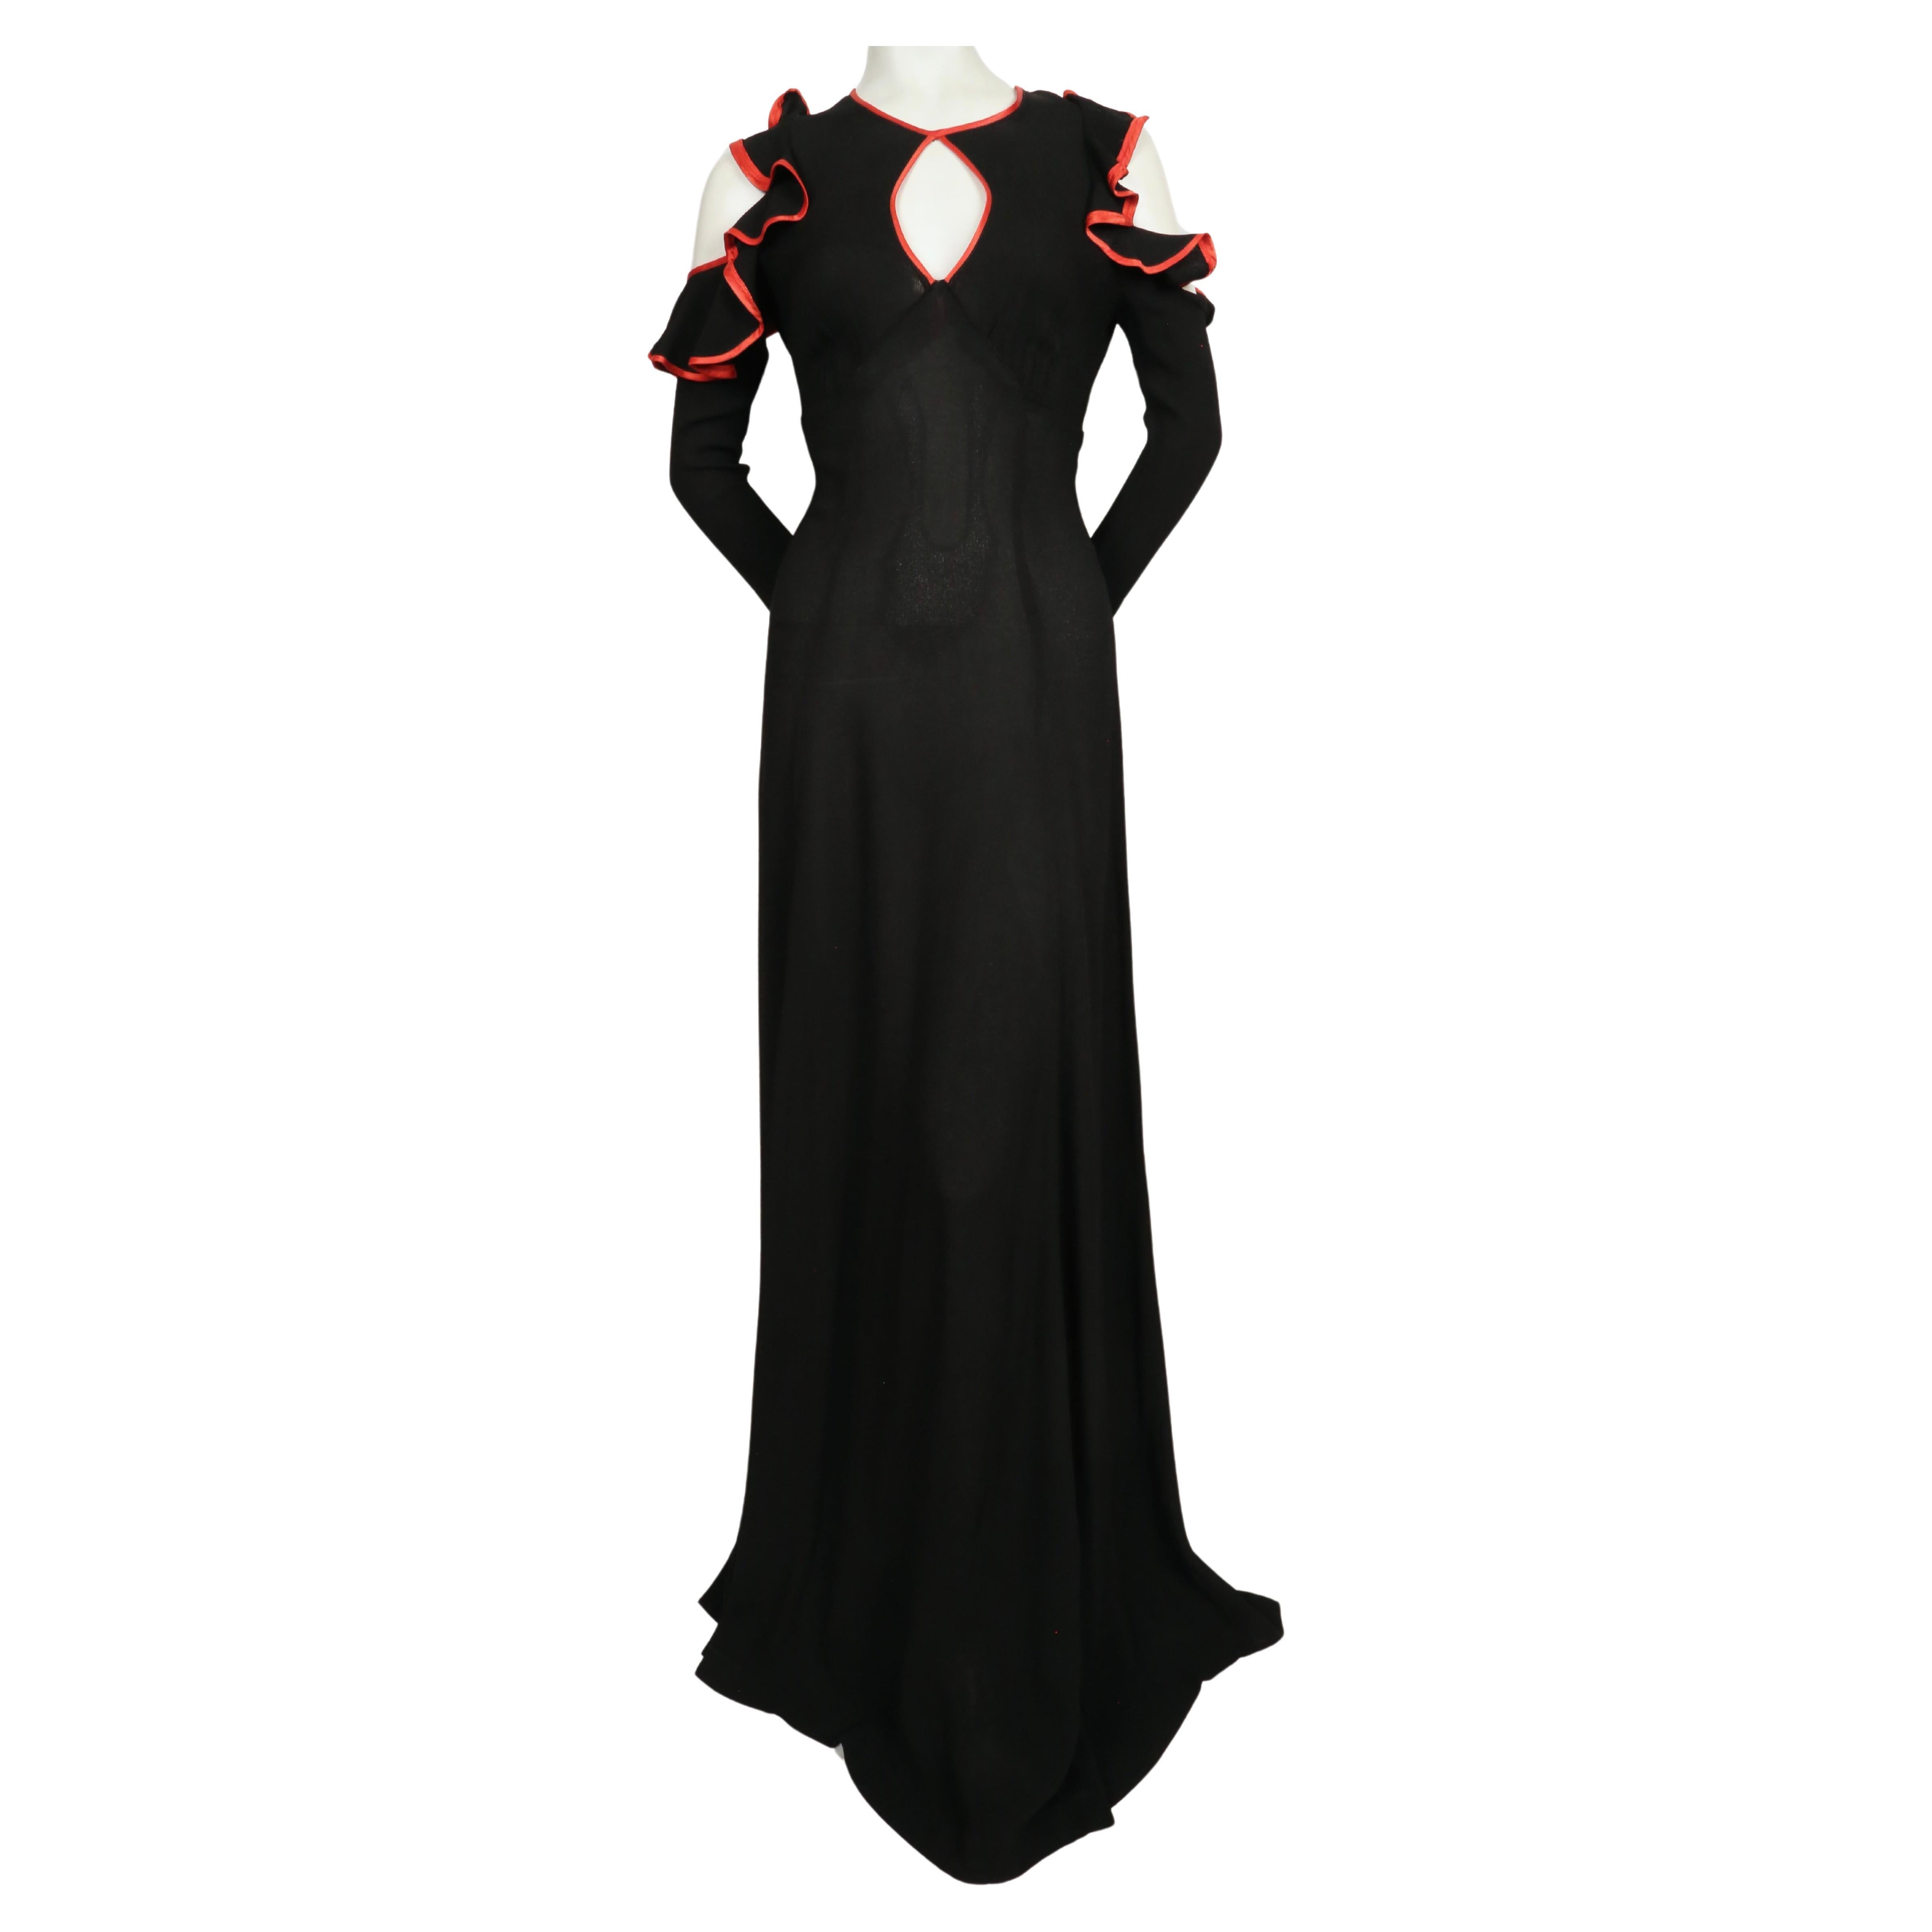 Jet-black, moss crepe, maxi dress with cut-out shoulders keyhole neckline, ruffles and red satin trim designed by Ossie Clark for Radley dating to 1968. Dress size is not marked, although it fits a US 2. Measurements are somewhat difficult to take